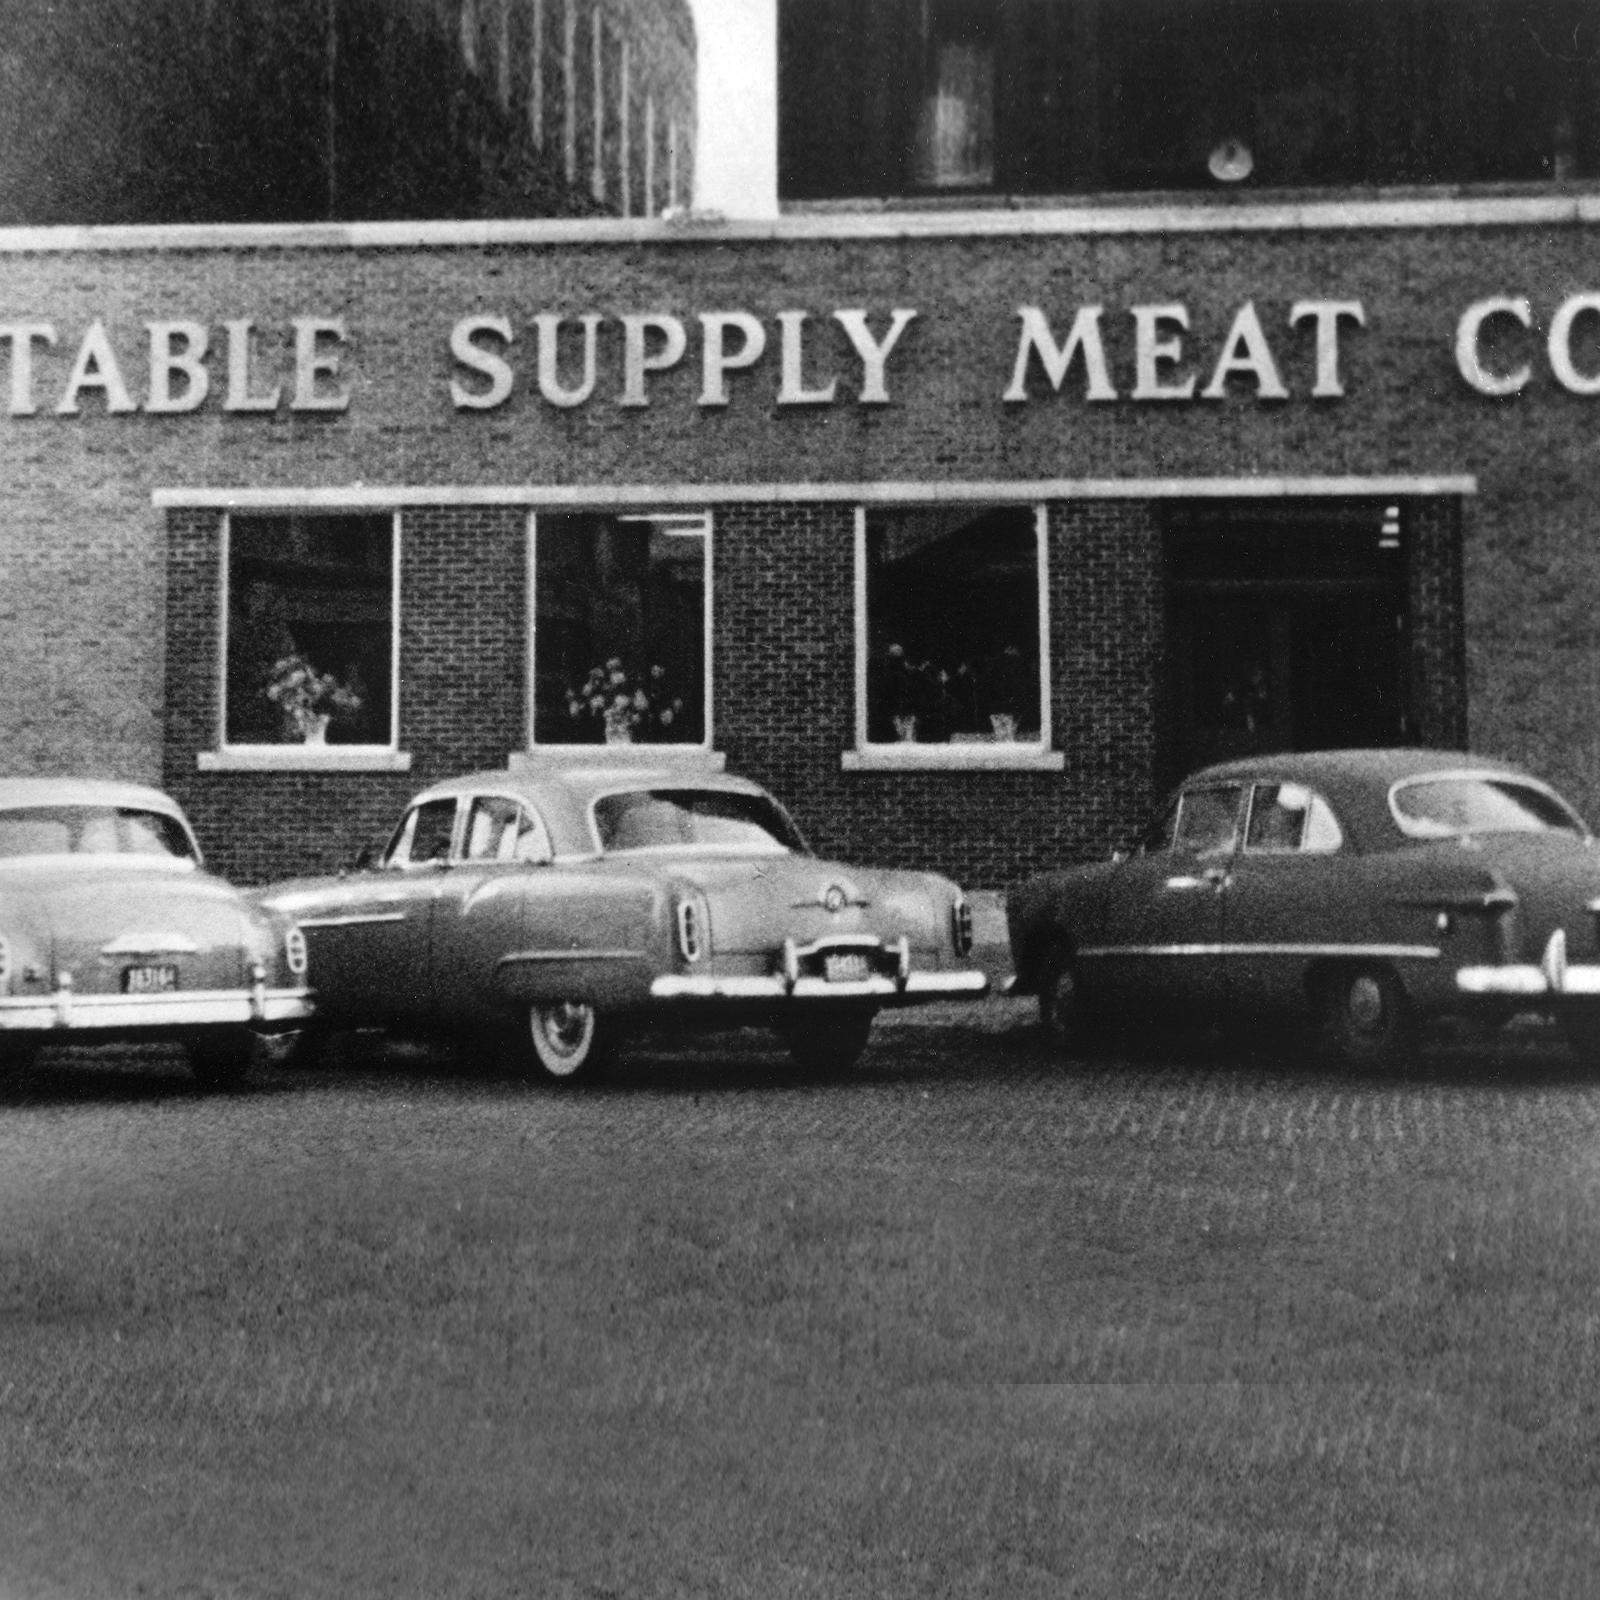 Table Supply Meat Co. first building